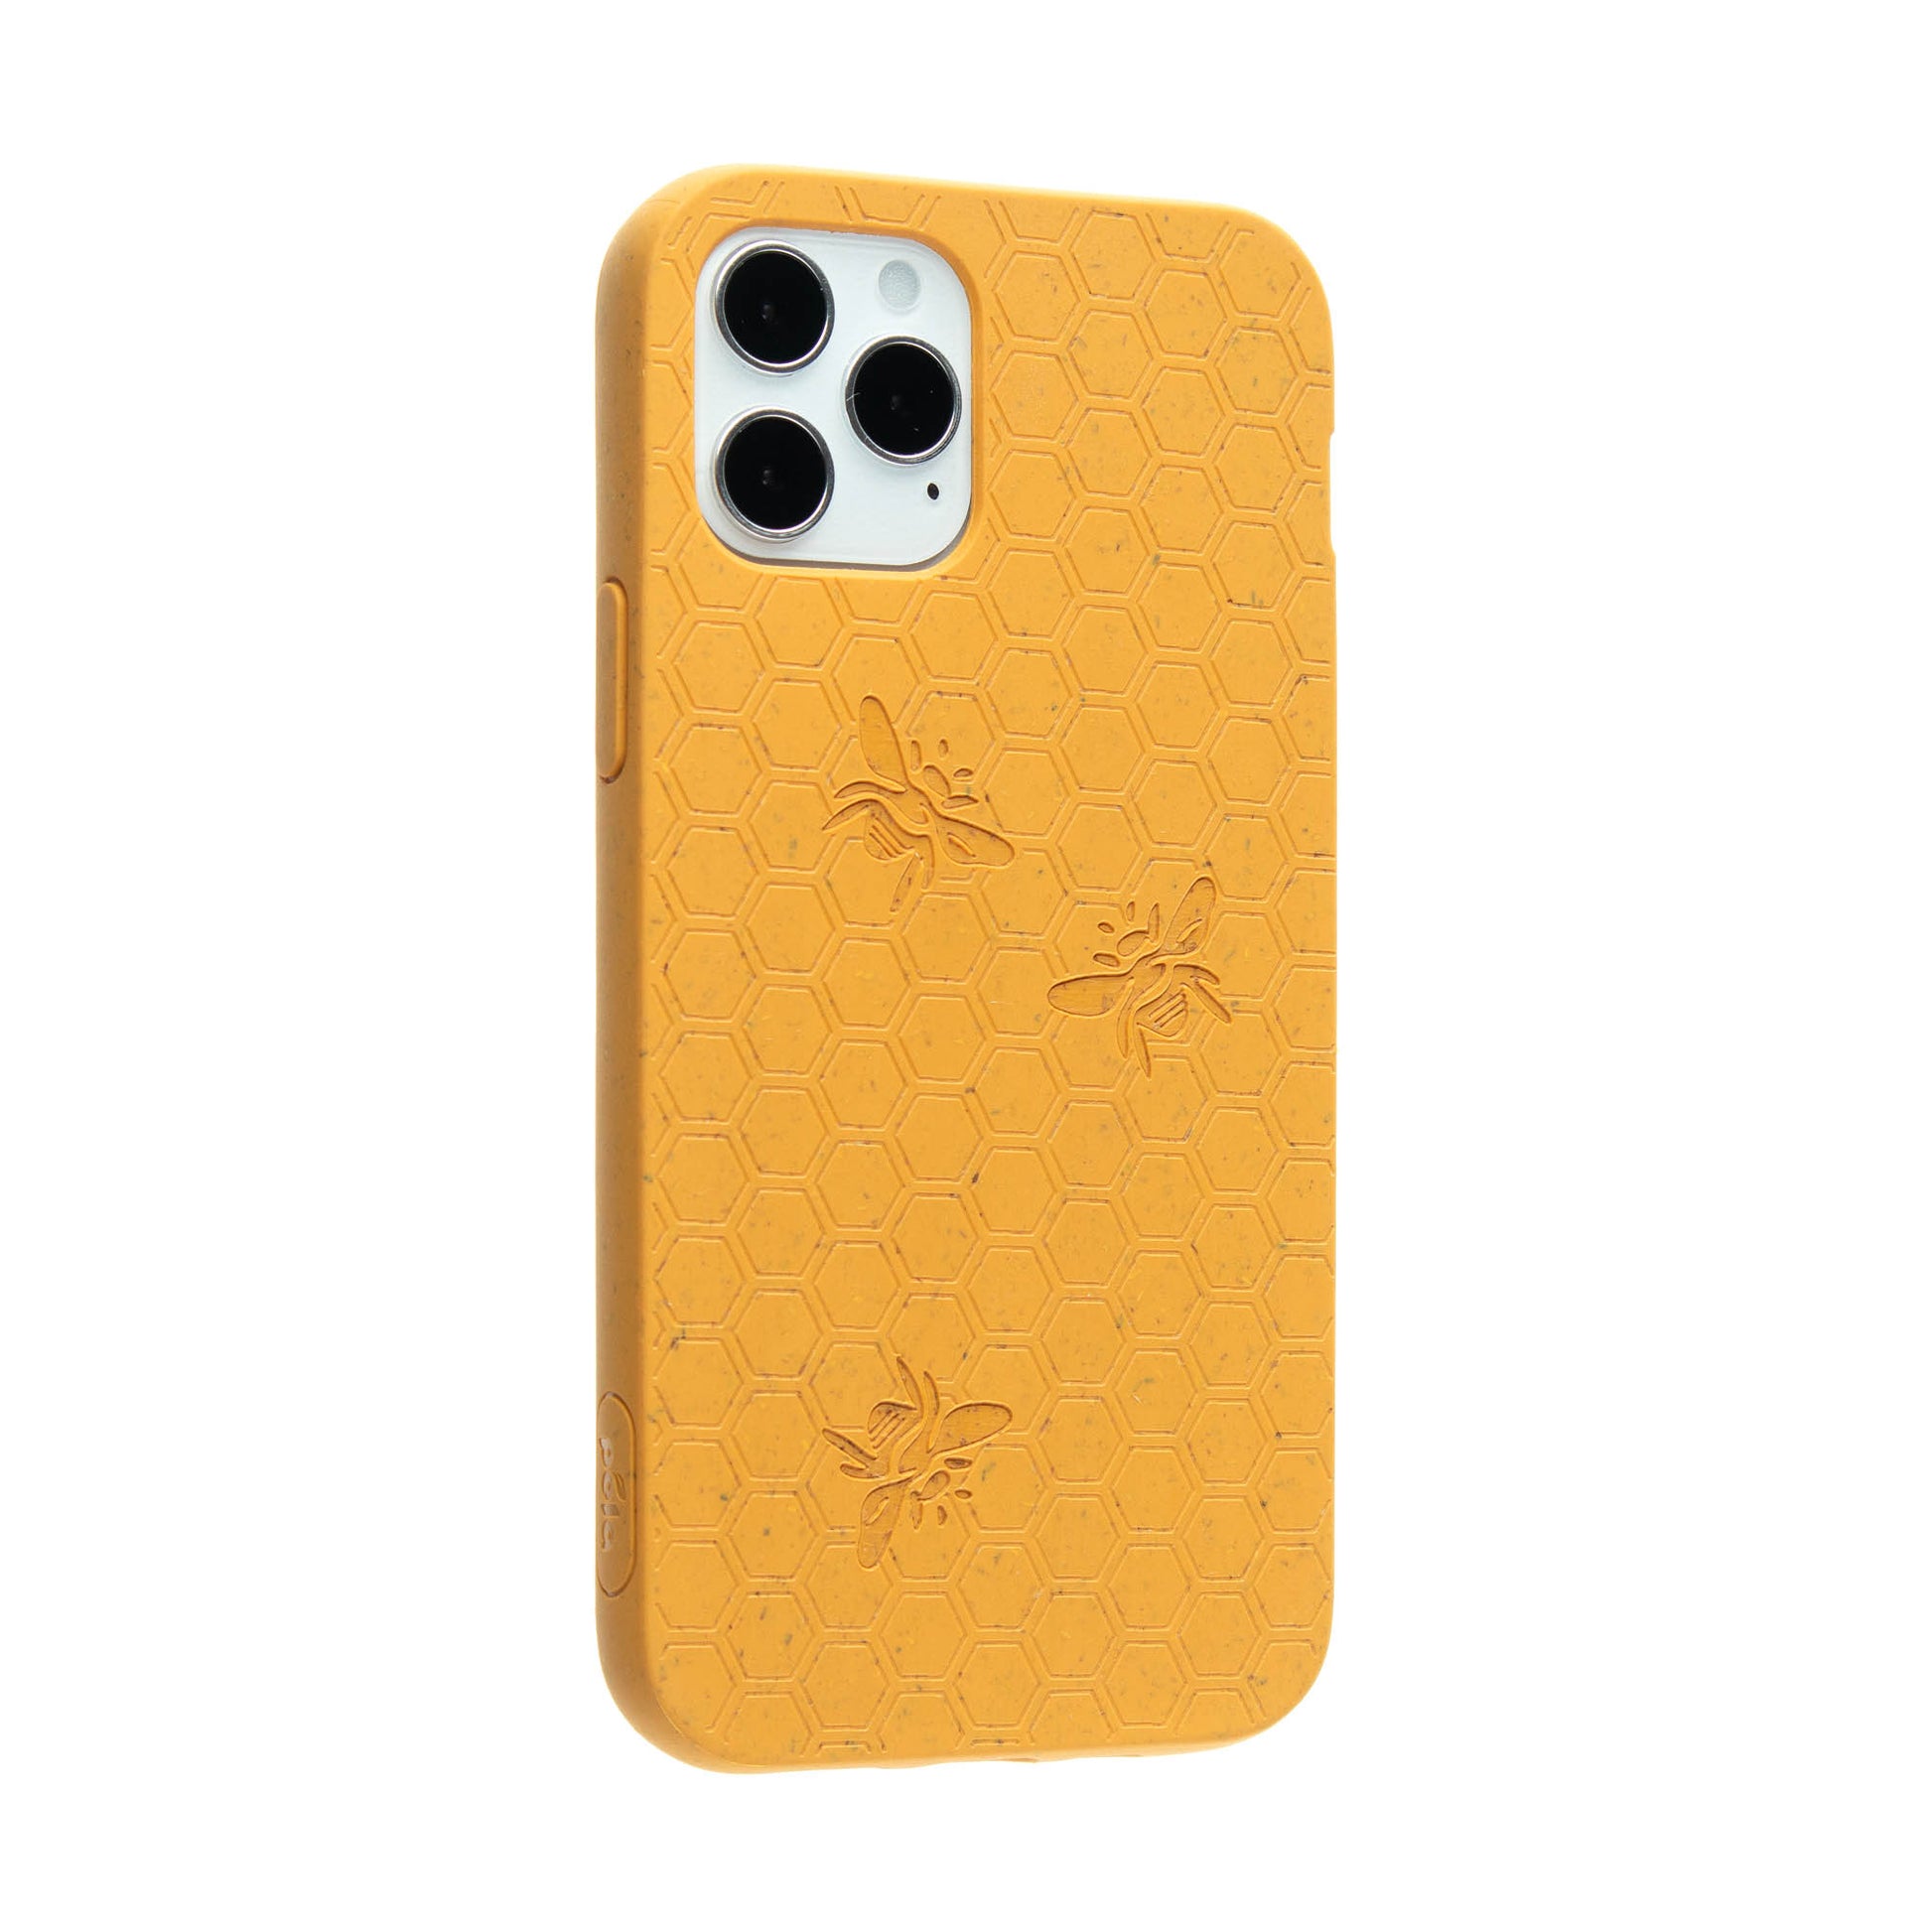 Left sideview of honey bee, honeycomb engraved Pela phone case for the iPhone 12.